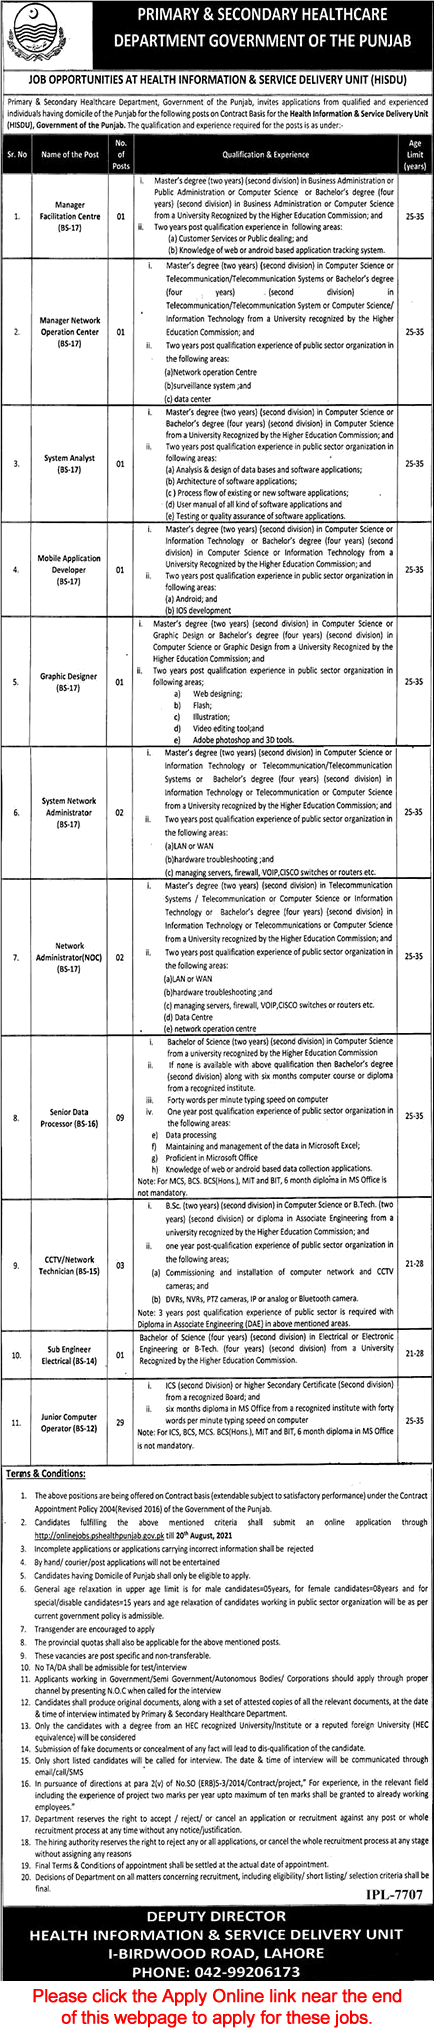 Primary and Secondary Healthcare Department Punjab Jobs August 2021 HISDU Apply Online Computer Operators & Others Latest